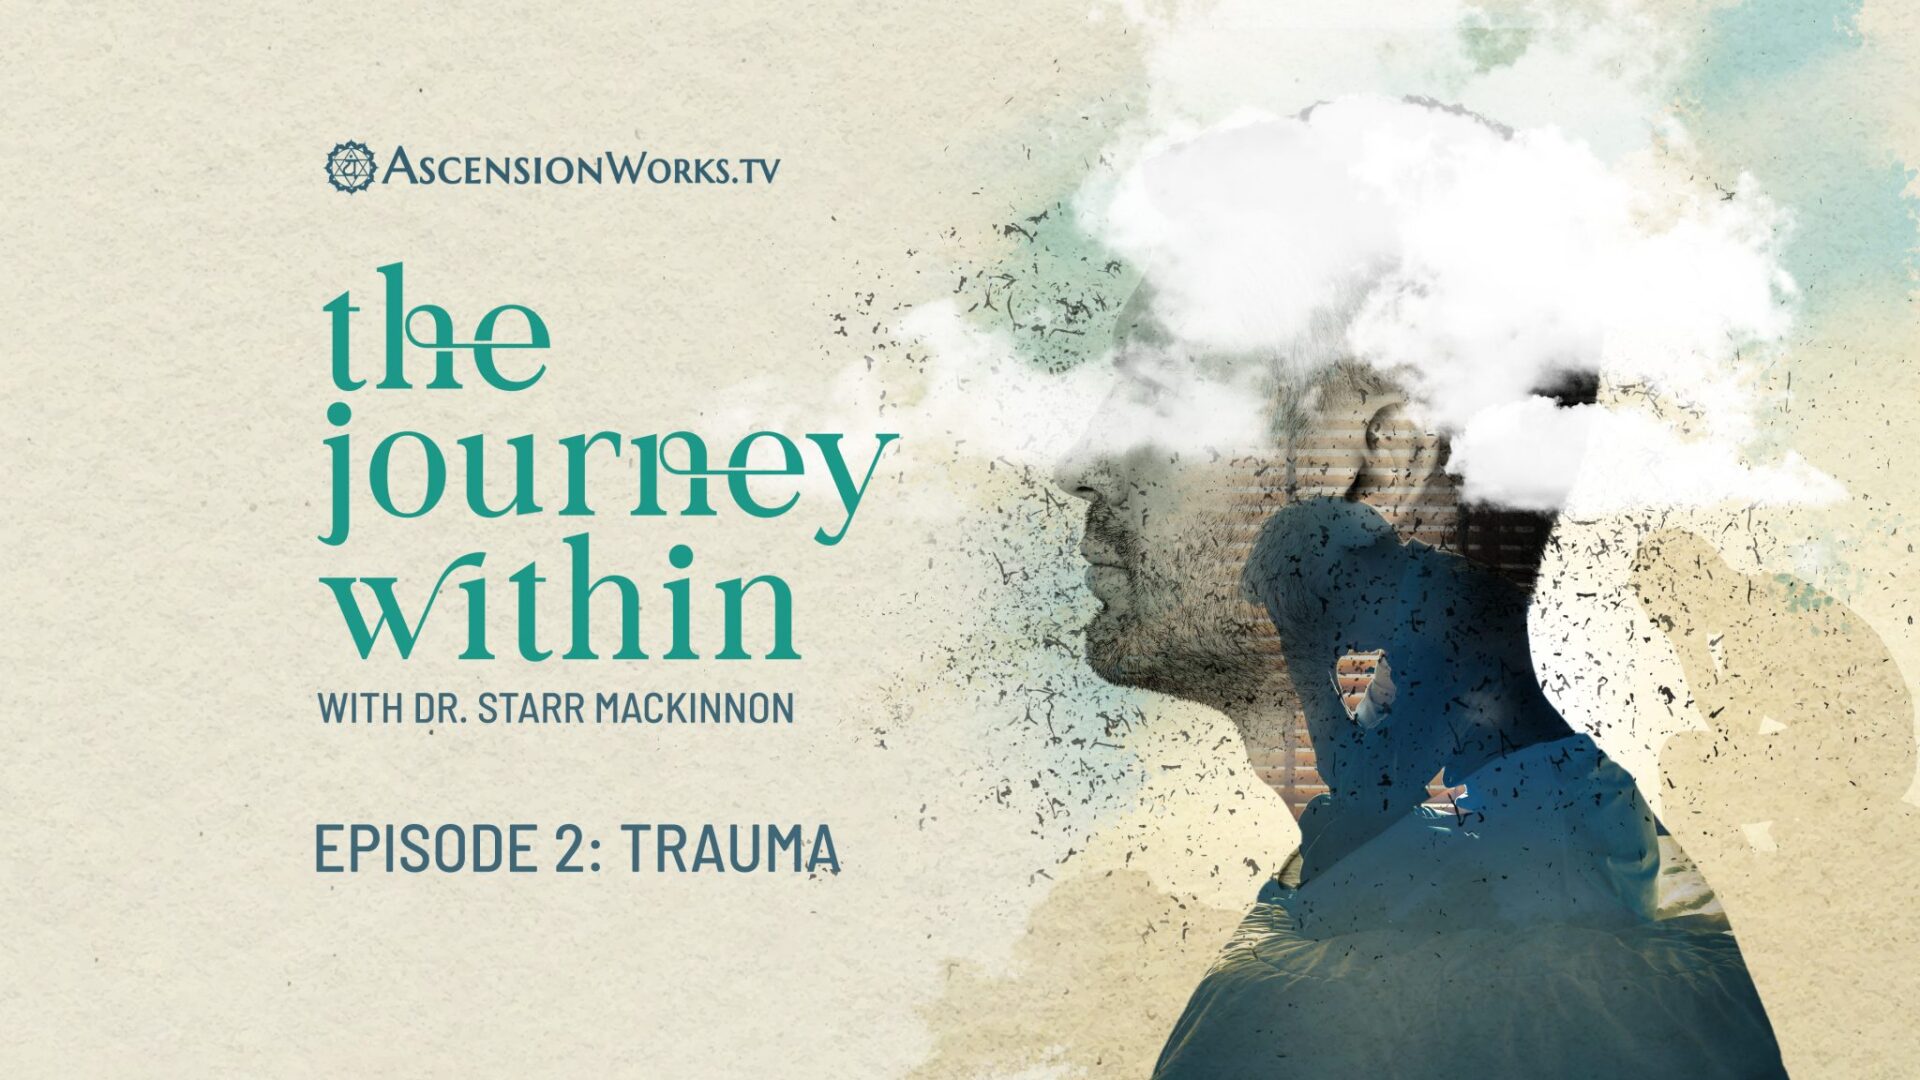 The Journey Within with Dr. Starr MacKinnon Episode 2 - Trauma. What is trauma and how to heal and do the inner work